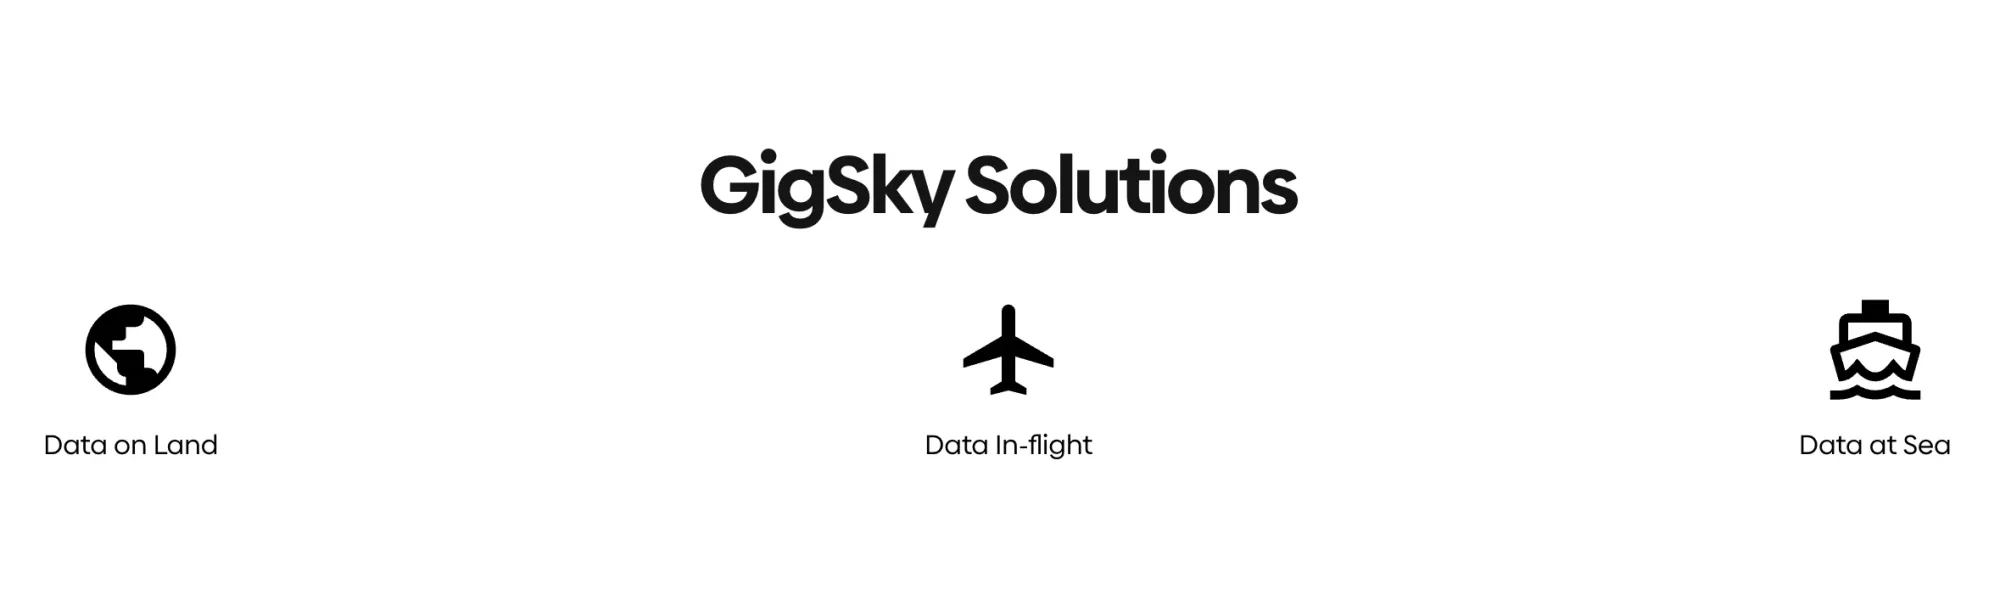 GigSky eSIM types or solutions